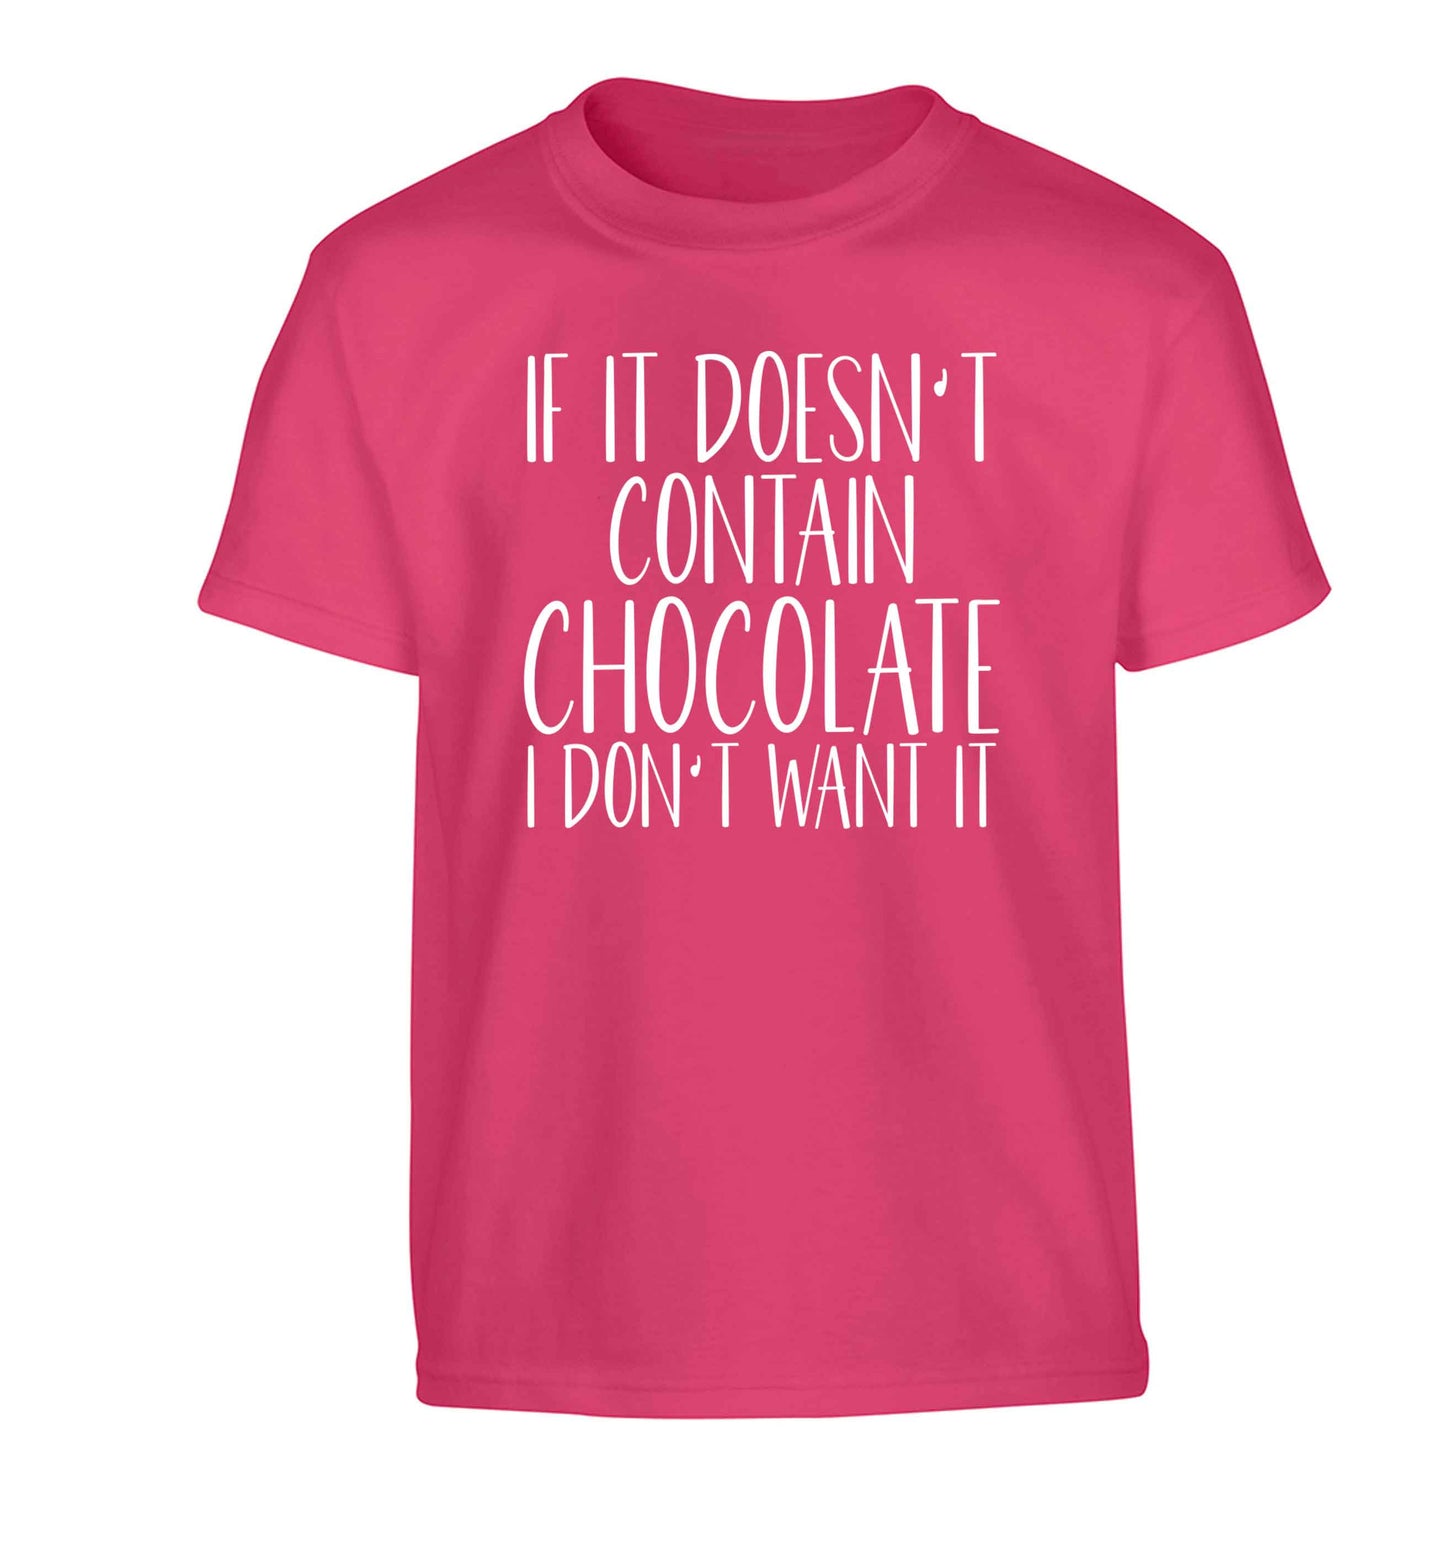 If it doesn't contain chocolate I don't want it Children's pink Tshirt 12-13 Years